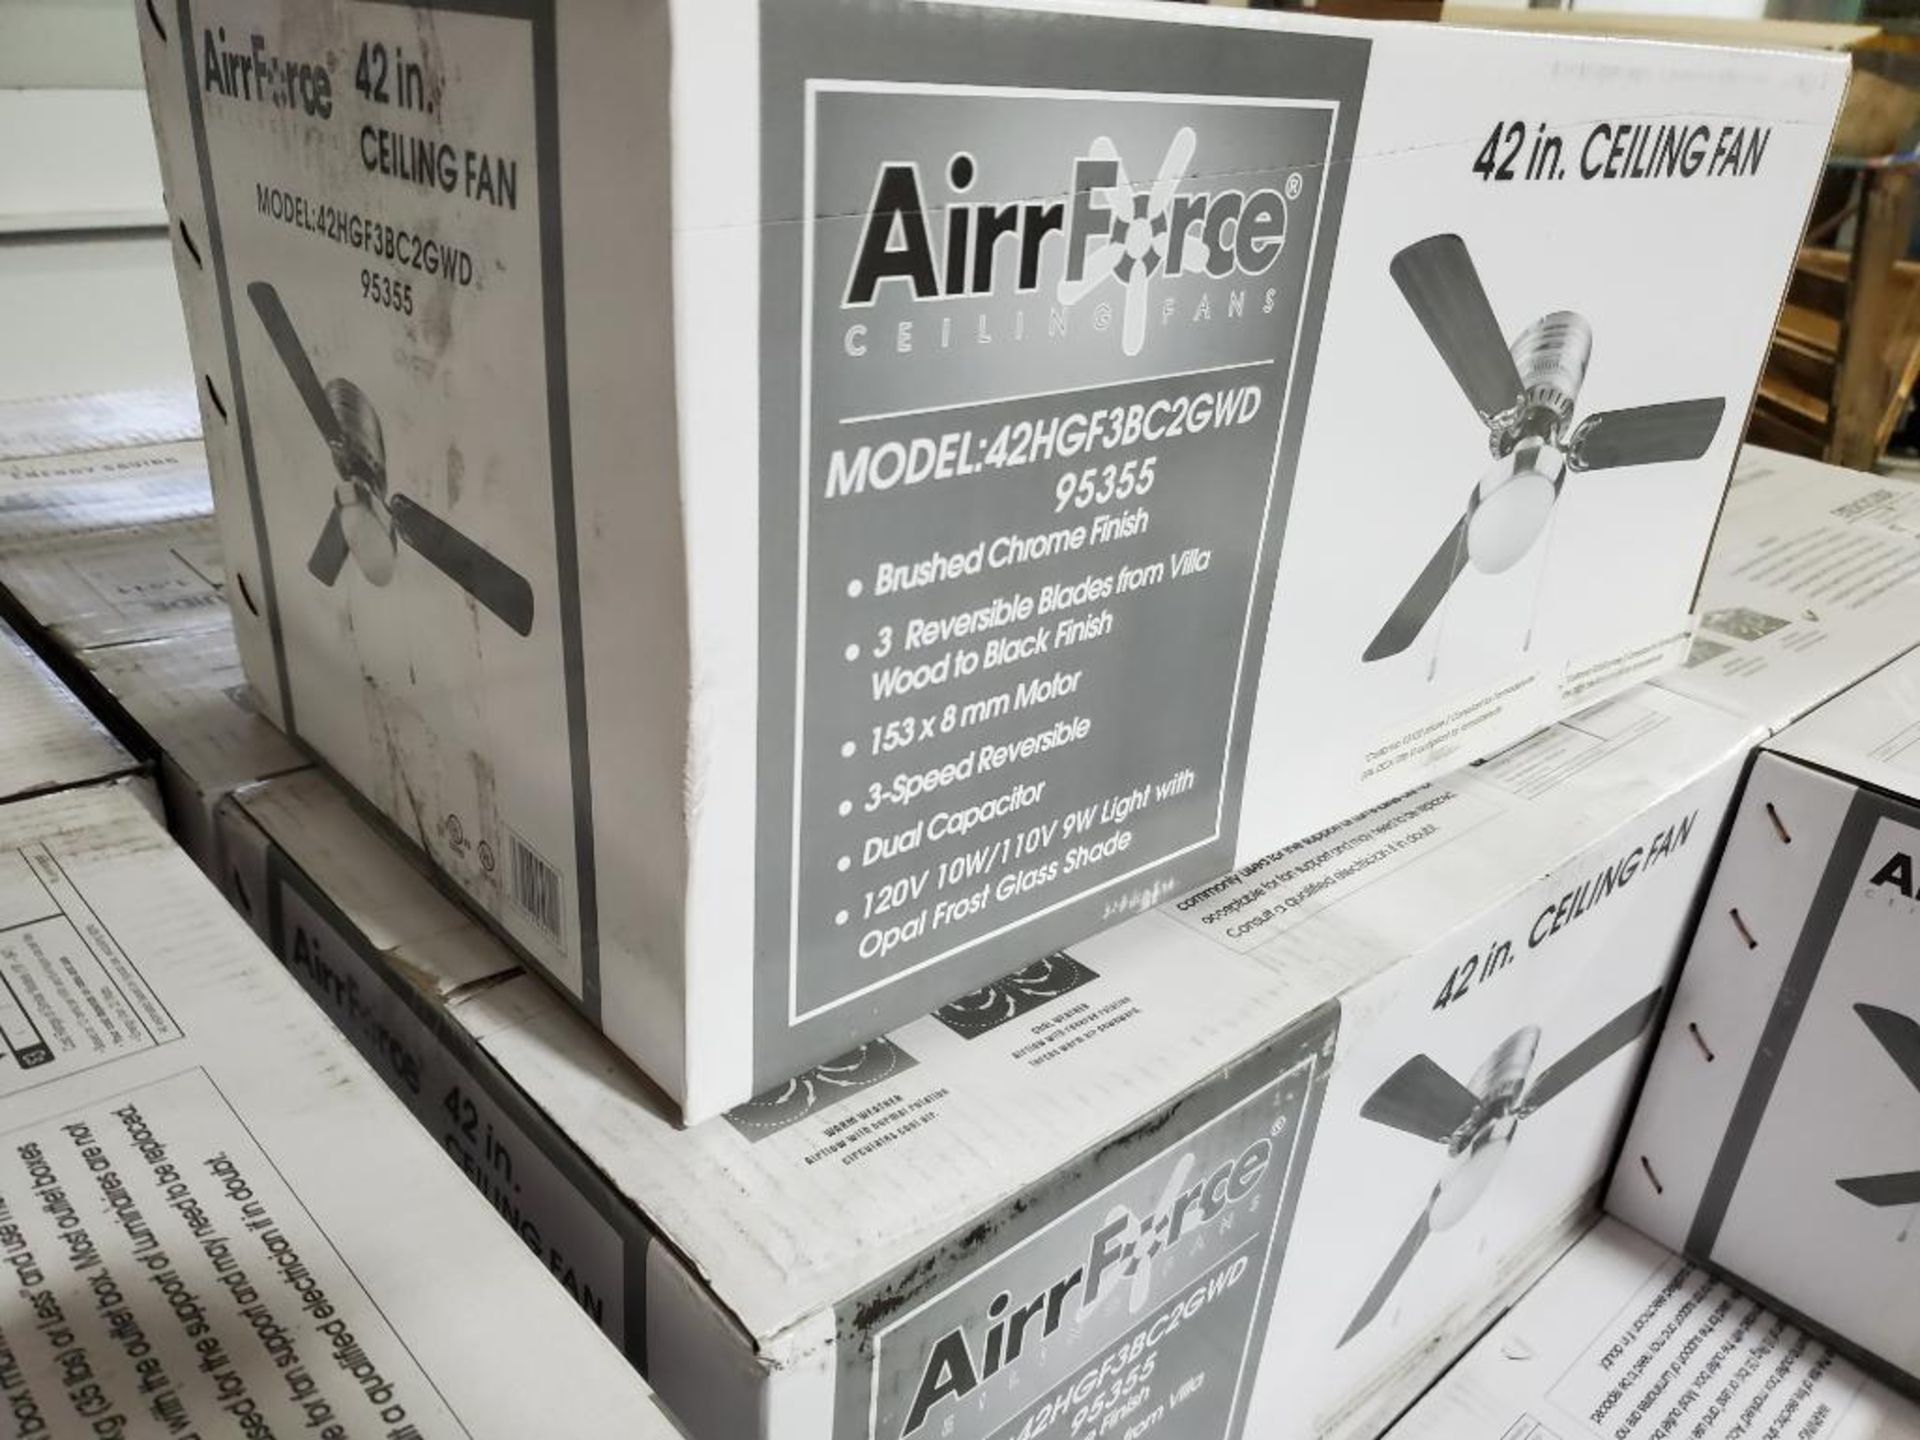 Qty 10 - AirrForce Ceiling Fans 42HGF3BC2GWD, 95355. 42 in ceiling fan. New in box. - Image 2 of 3